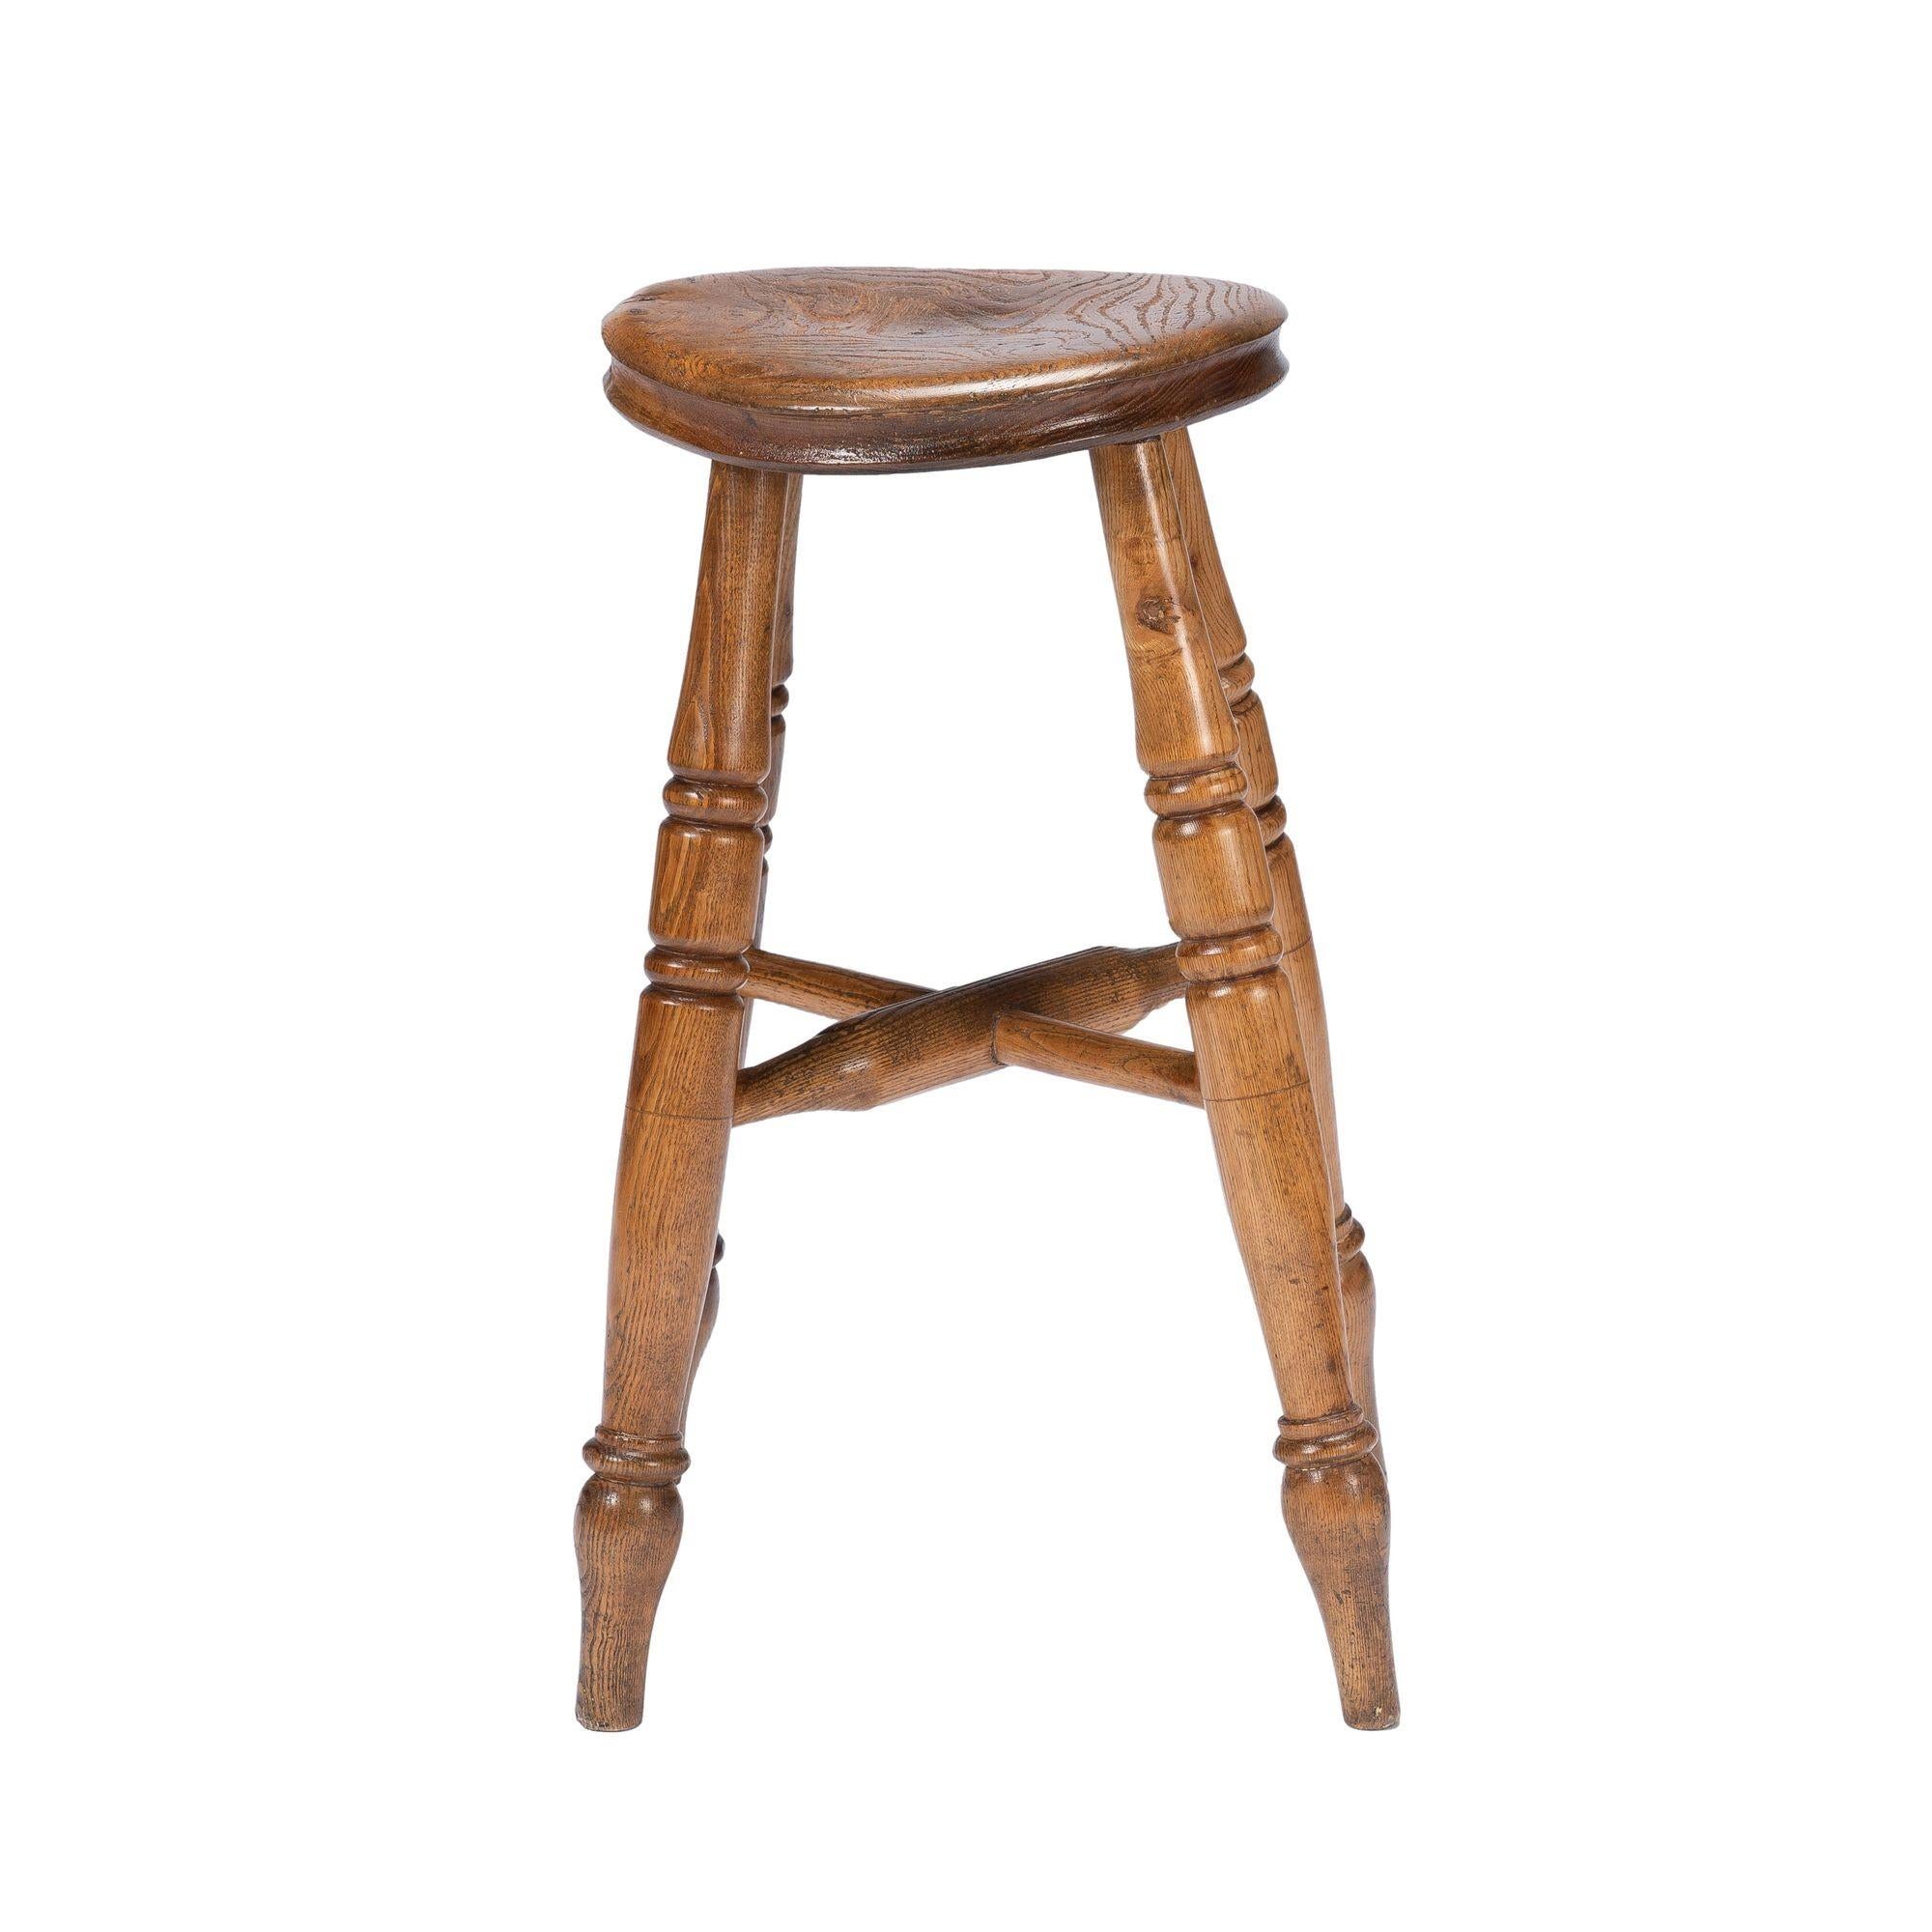 English elm wood circular seat milking stool on turned legs terminating in tulip bulb feet. Joined by ‘X’ stretchers. 
England, circa 1860.